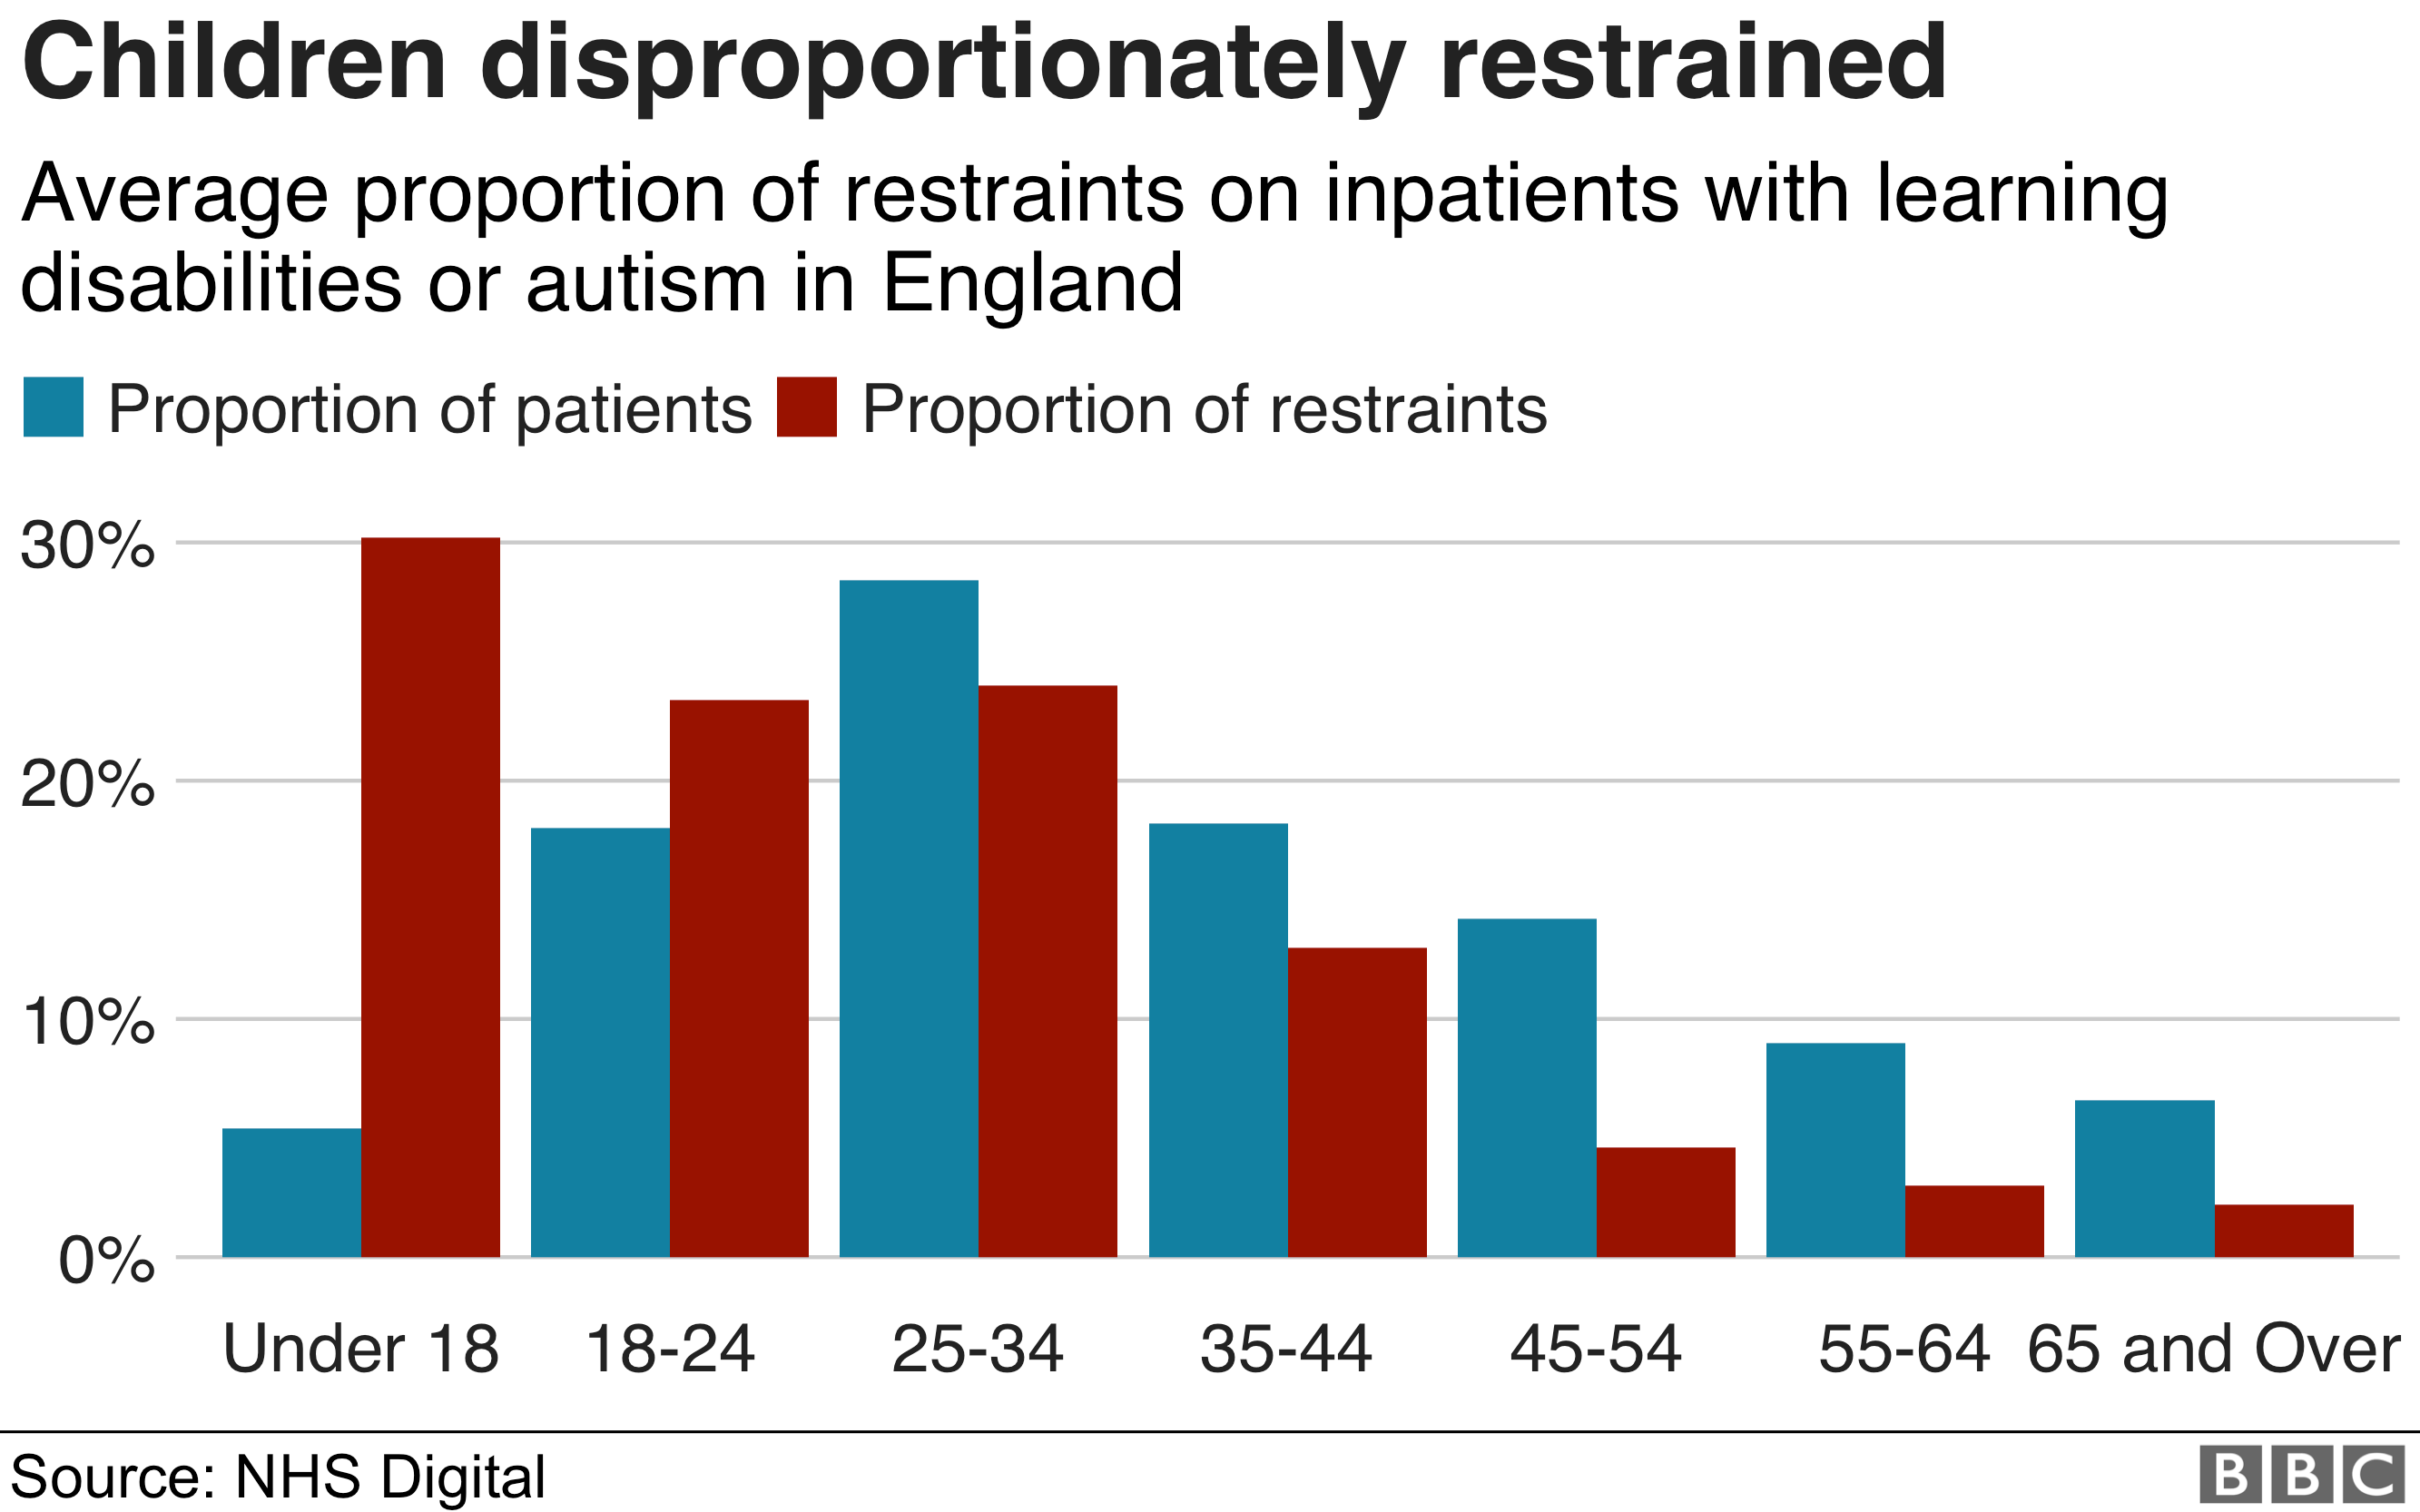 Chart showing children disproportionately restrained in ATUs